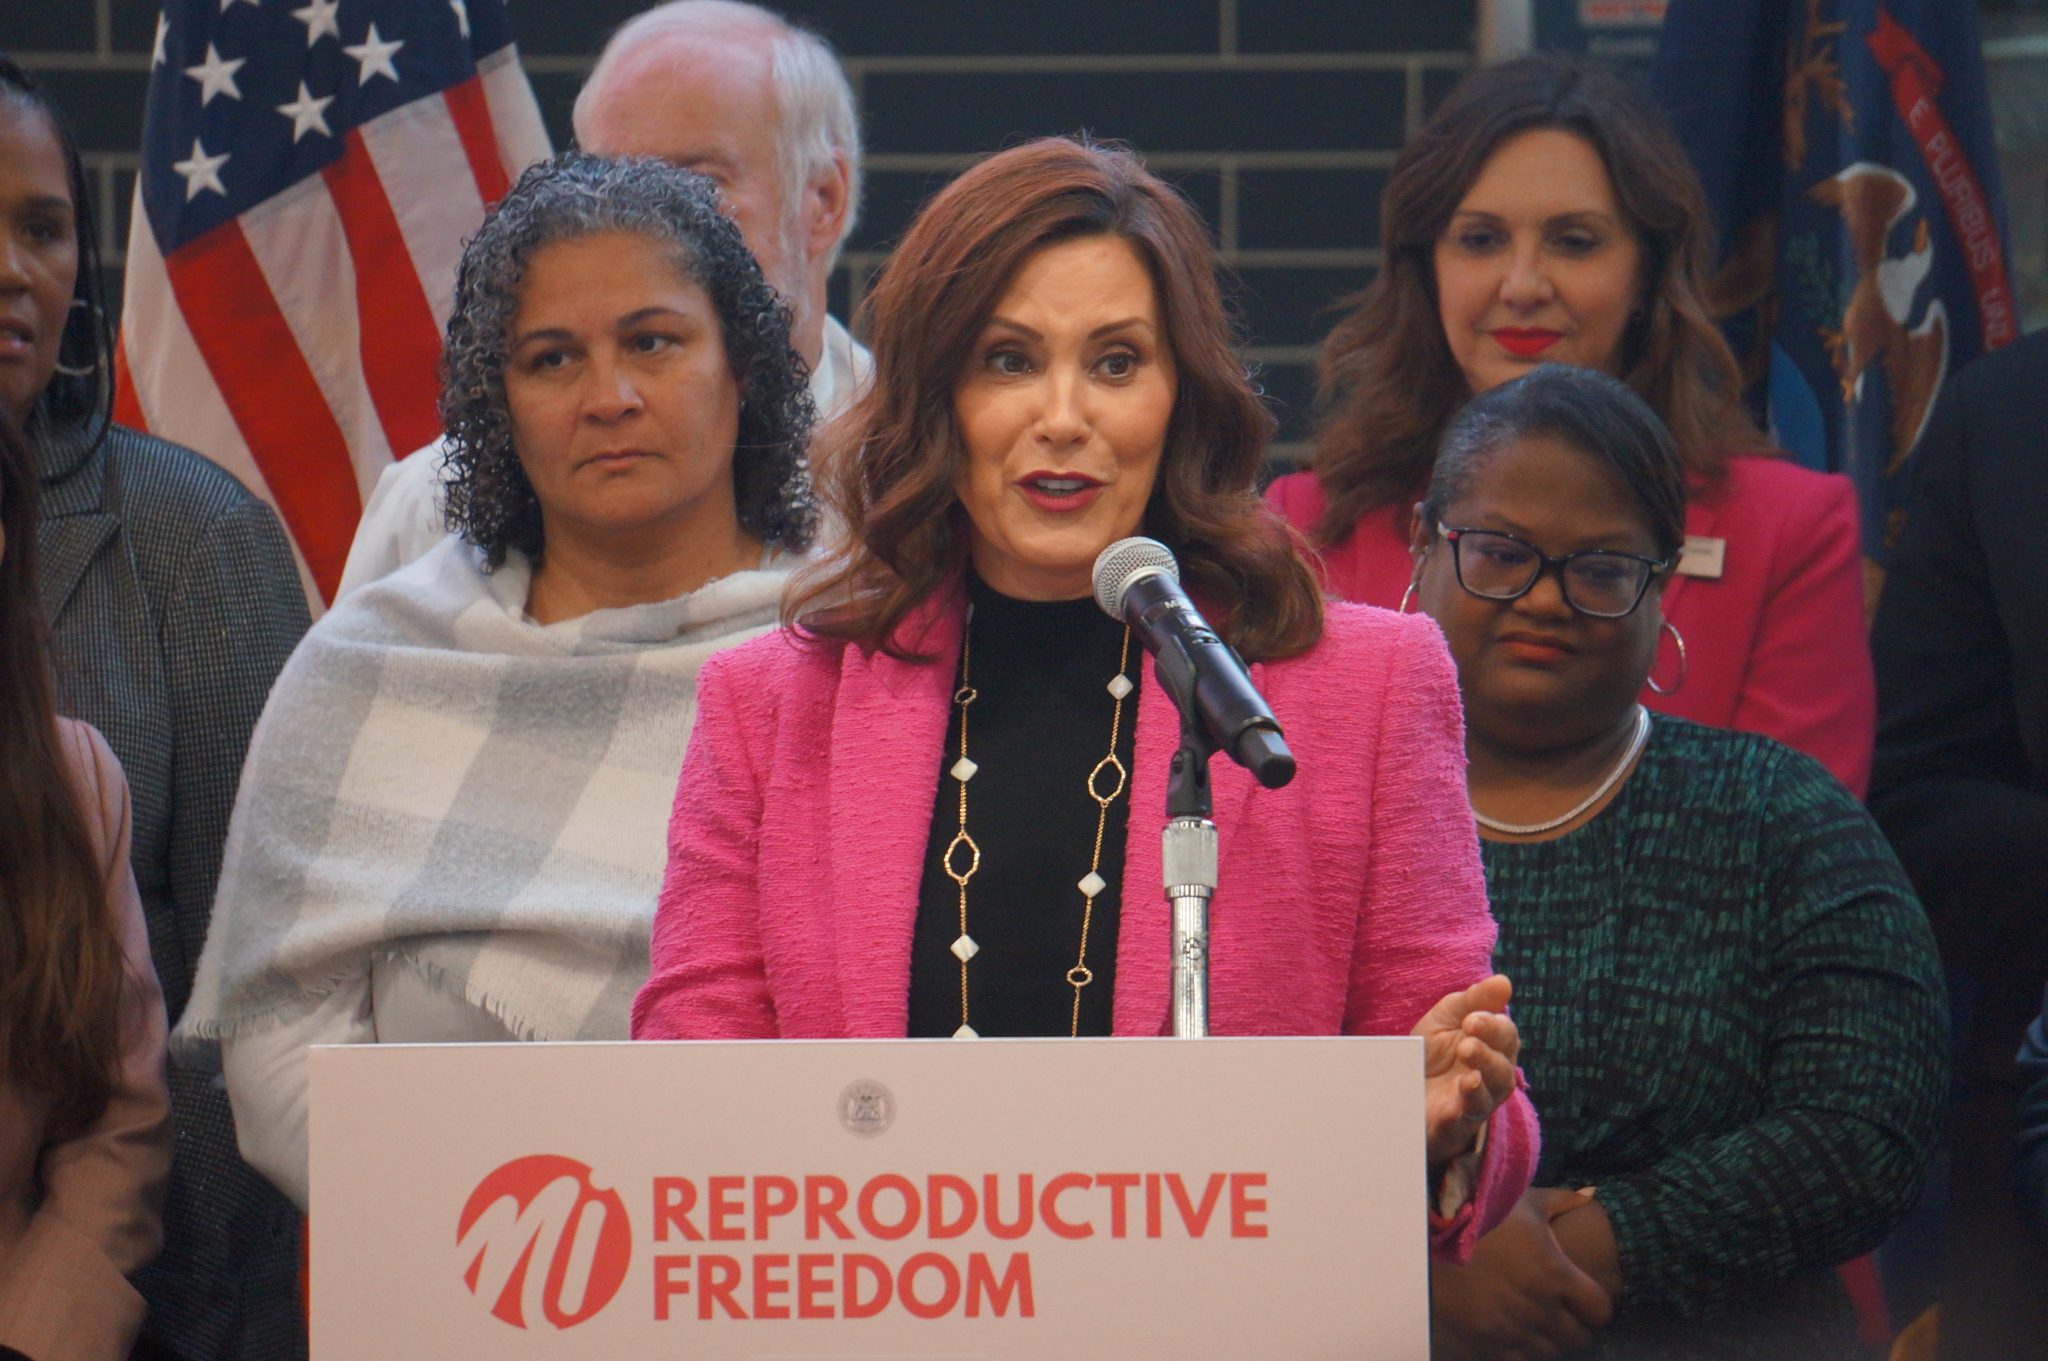 Gov. Gretchen Whitmer says she looks forward to signing more laws that further roll back abortion restrictions.